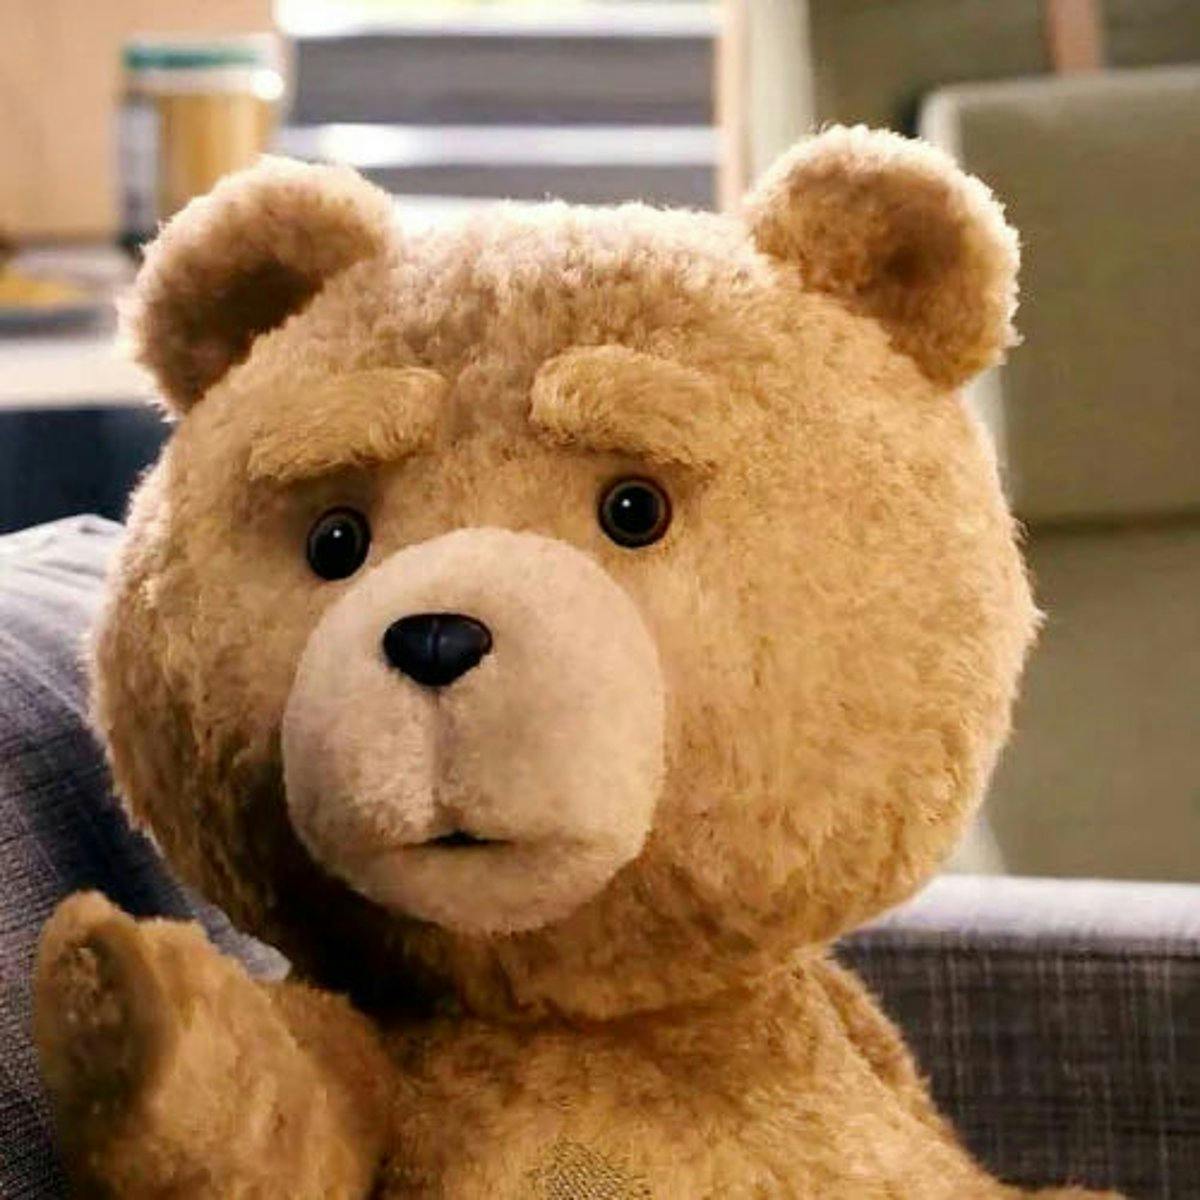 Ted (Ted the movie)